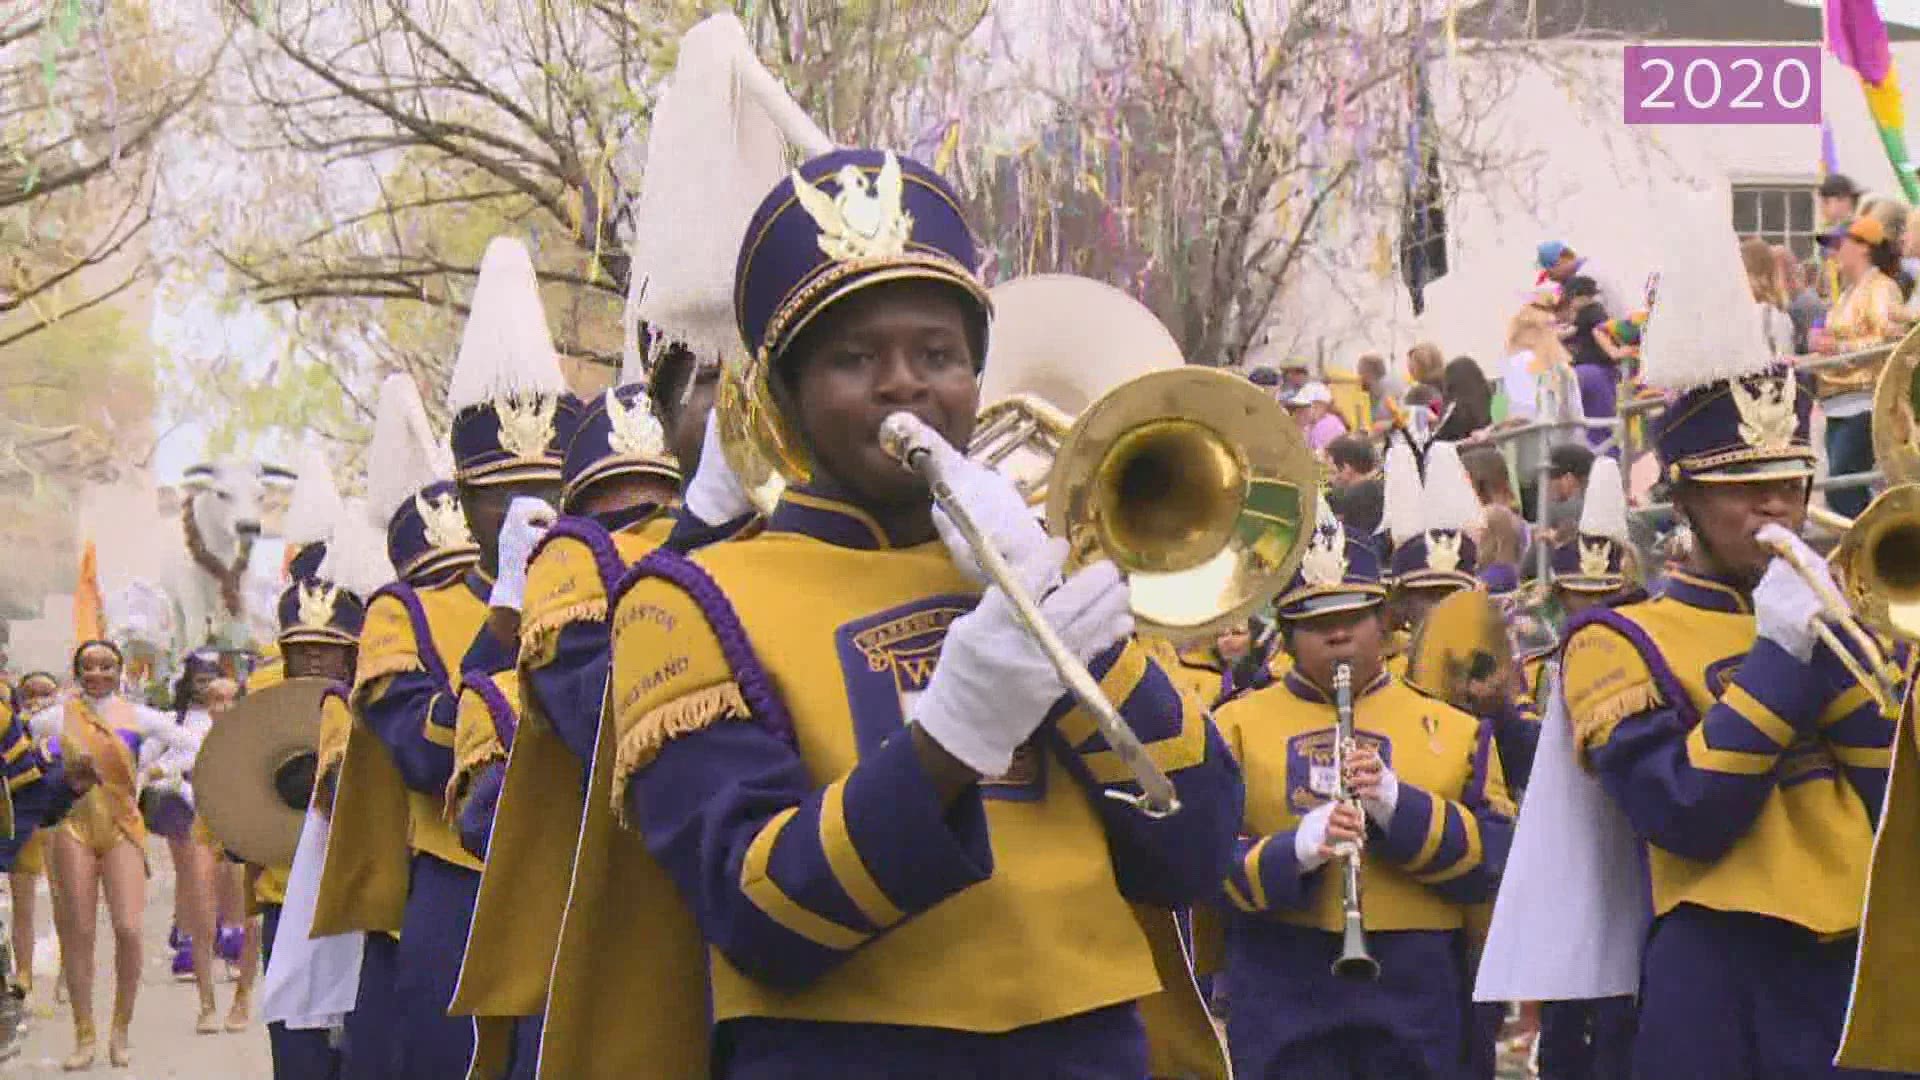 All throughout Mardi Gras 2021, we're sharing Mardi Grass memories from past parades, as well as new footage shot this year.